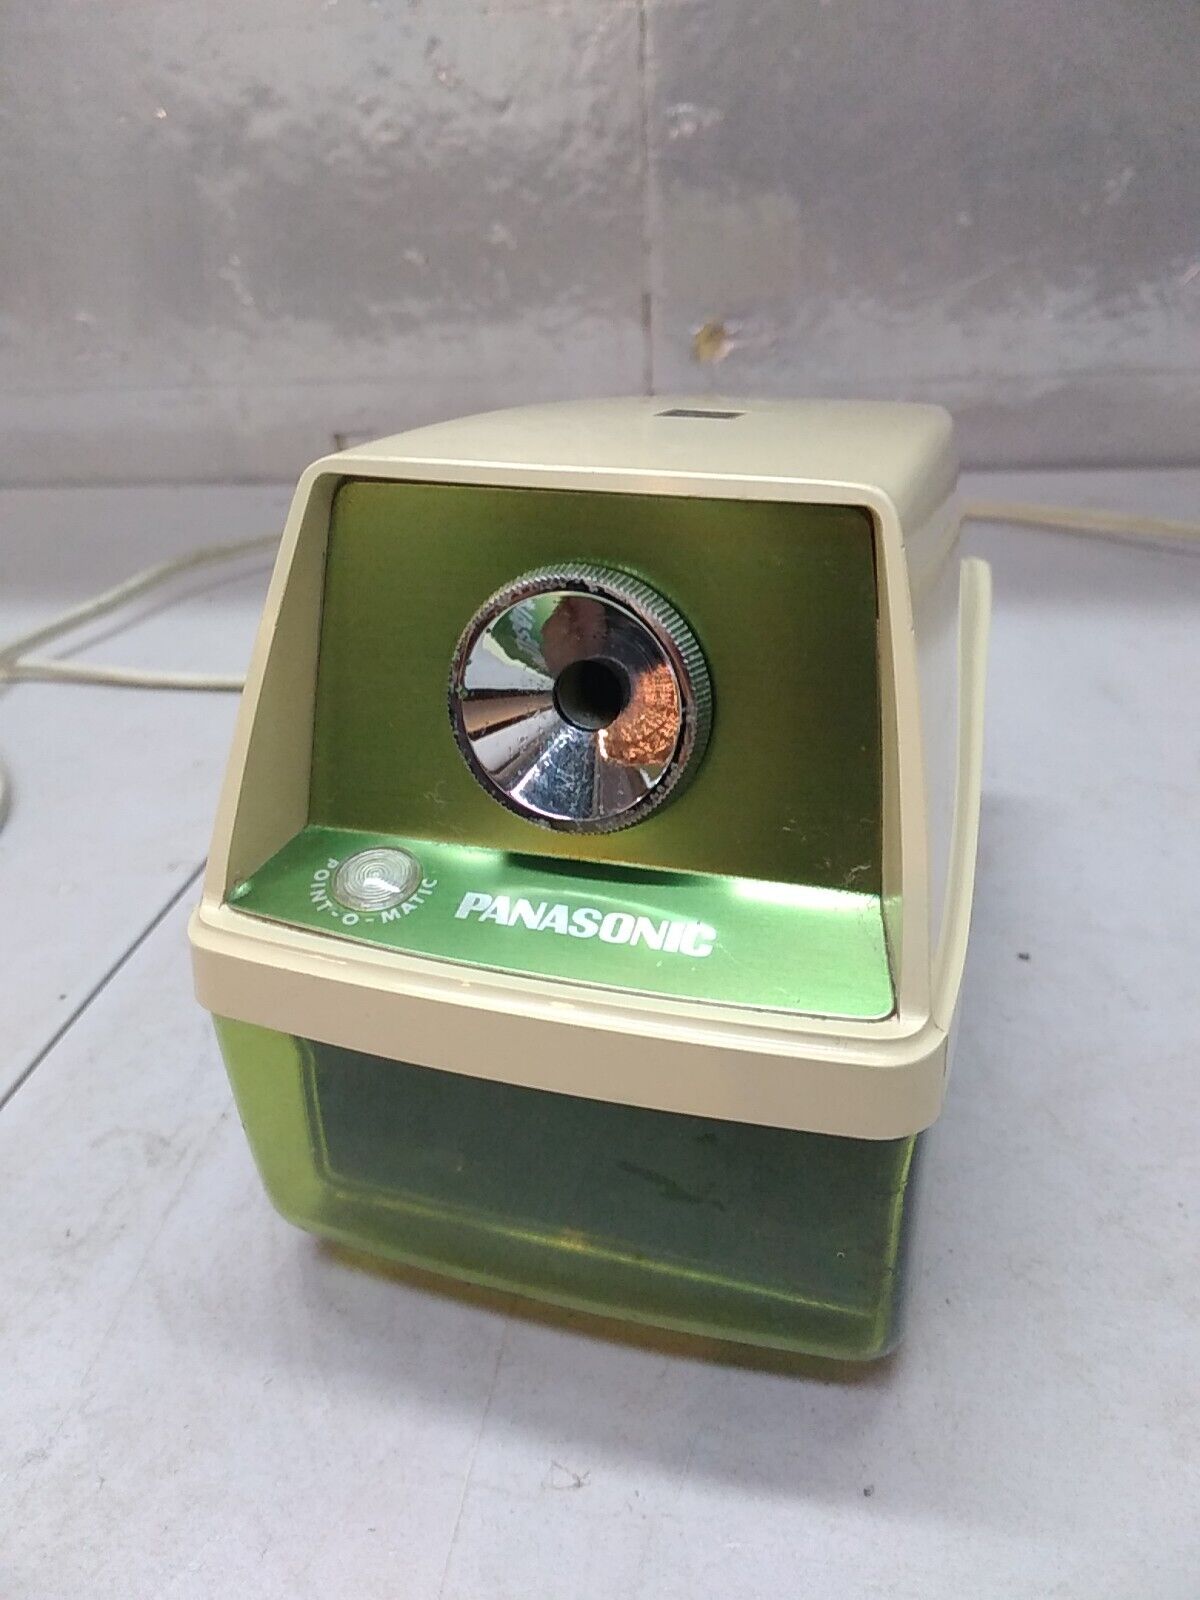 Vintage Panasonic Electric Pencil Sharpener KP-8A Point O Matic Tested Clean